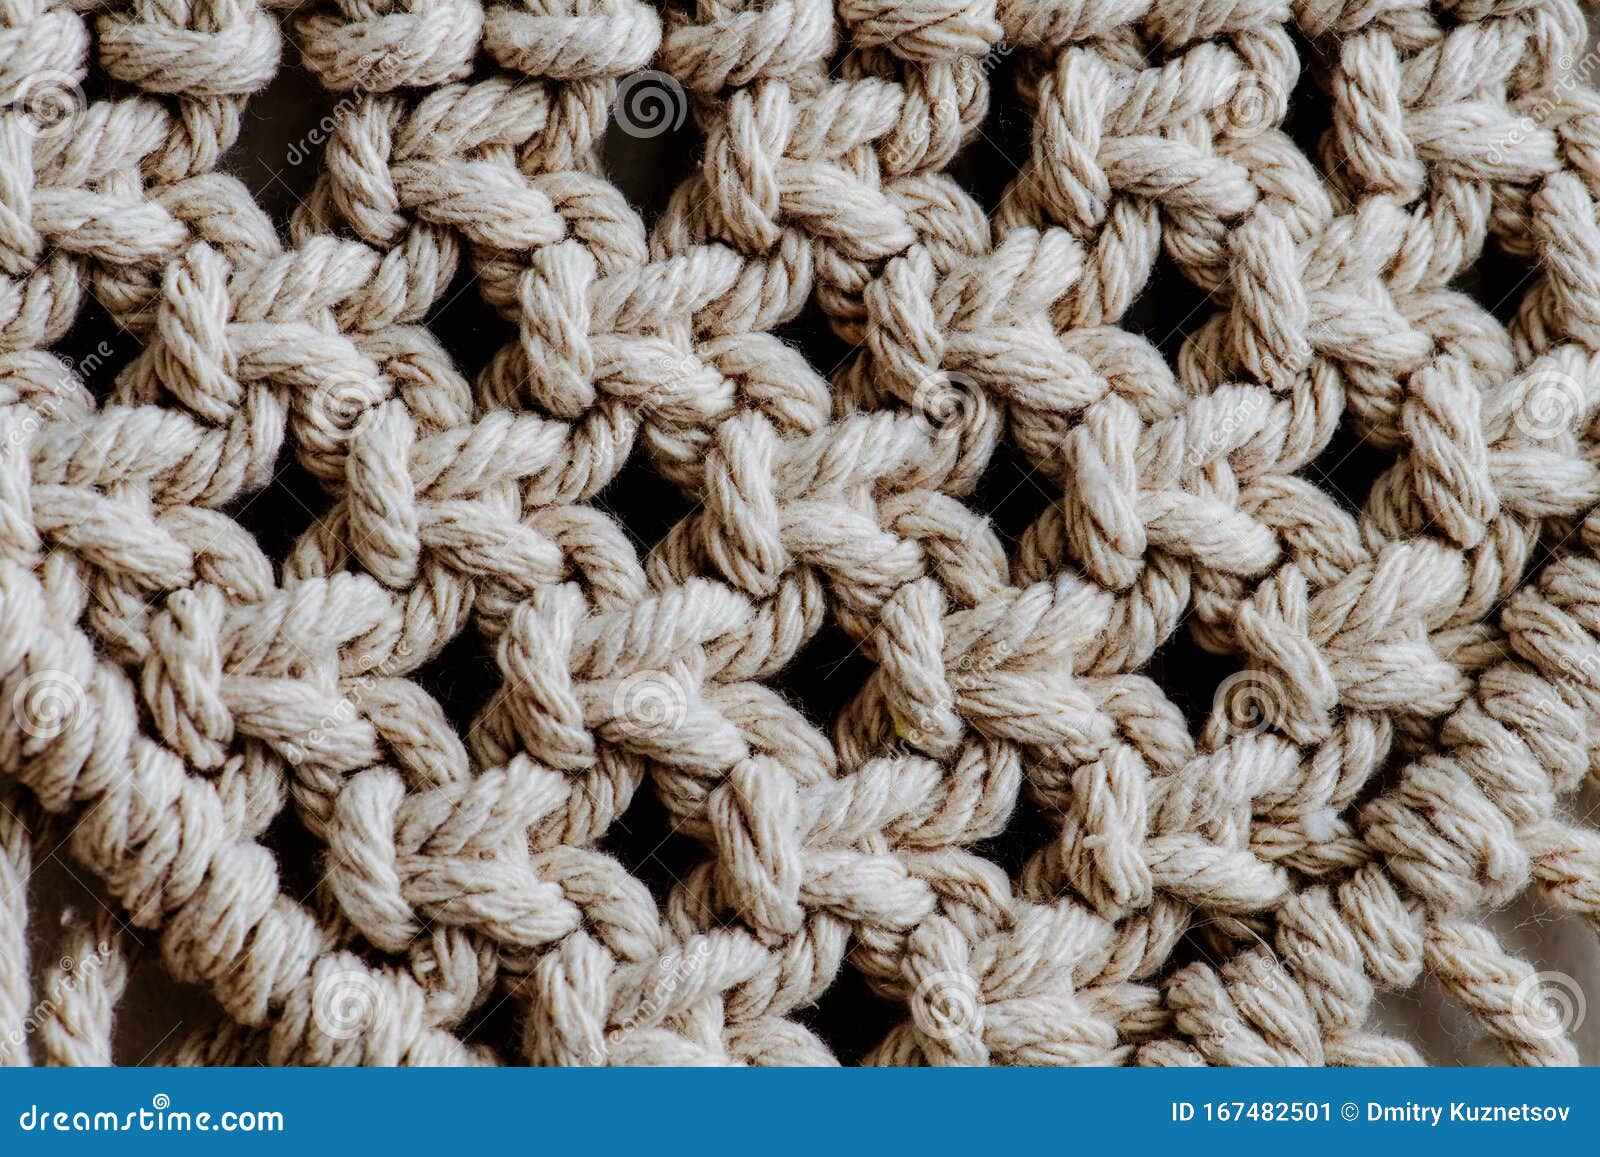 Texture of Open-weaved Macrame Tapestry Up Close. Knots and Ropes in a  Pattern Stock Image - Image of craft, closeup: 167482501